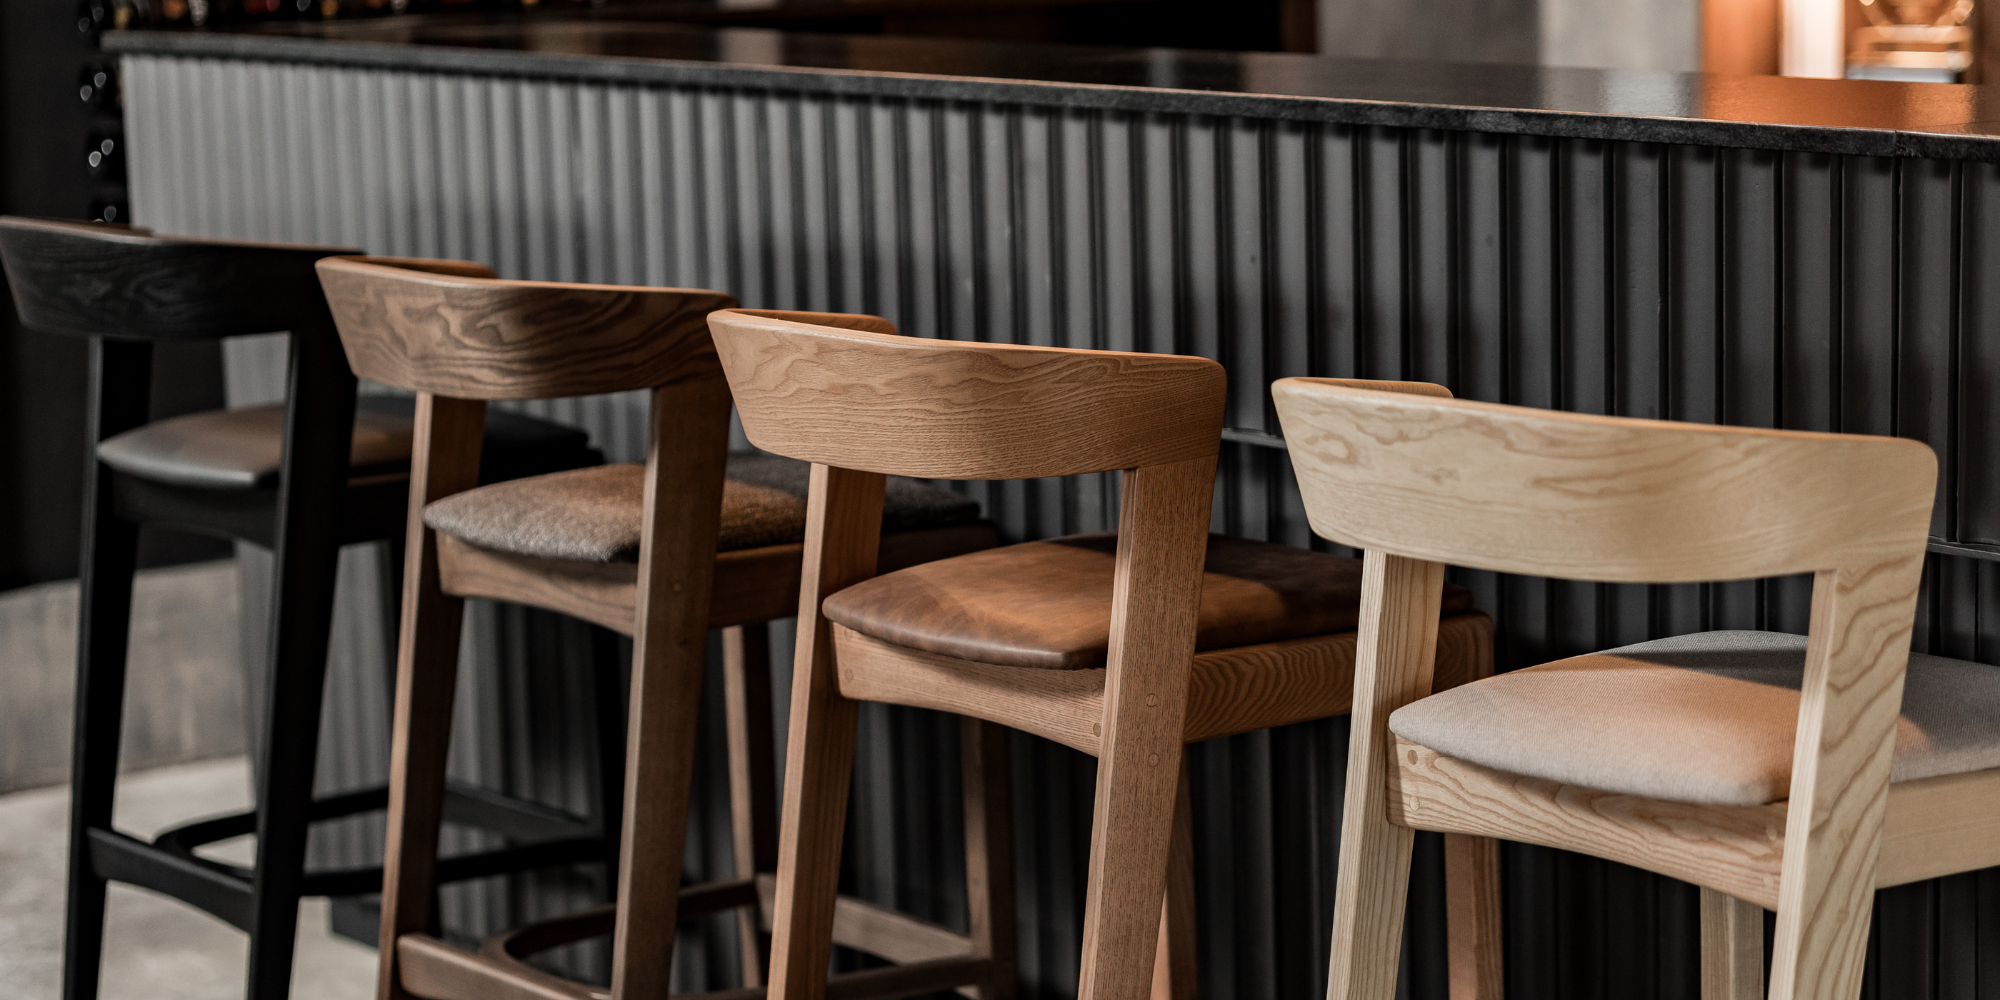 Considerations when Specifying Bar Stools